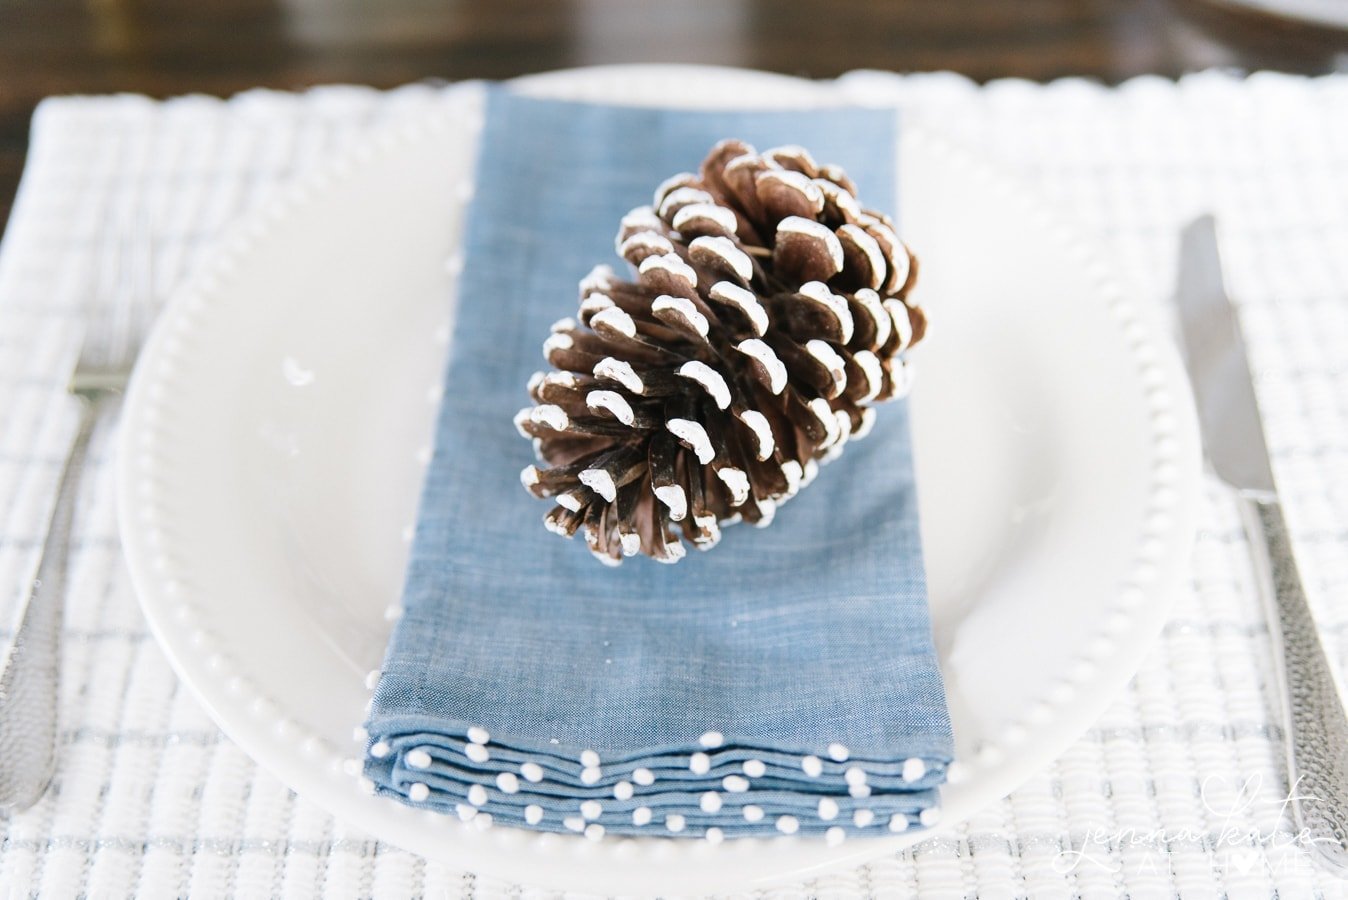 Pine cone on a white plate with a soft blue napkin 